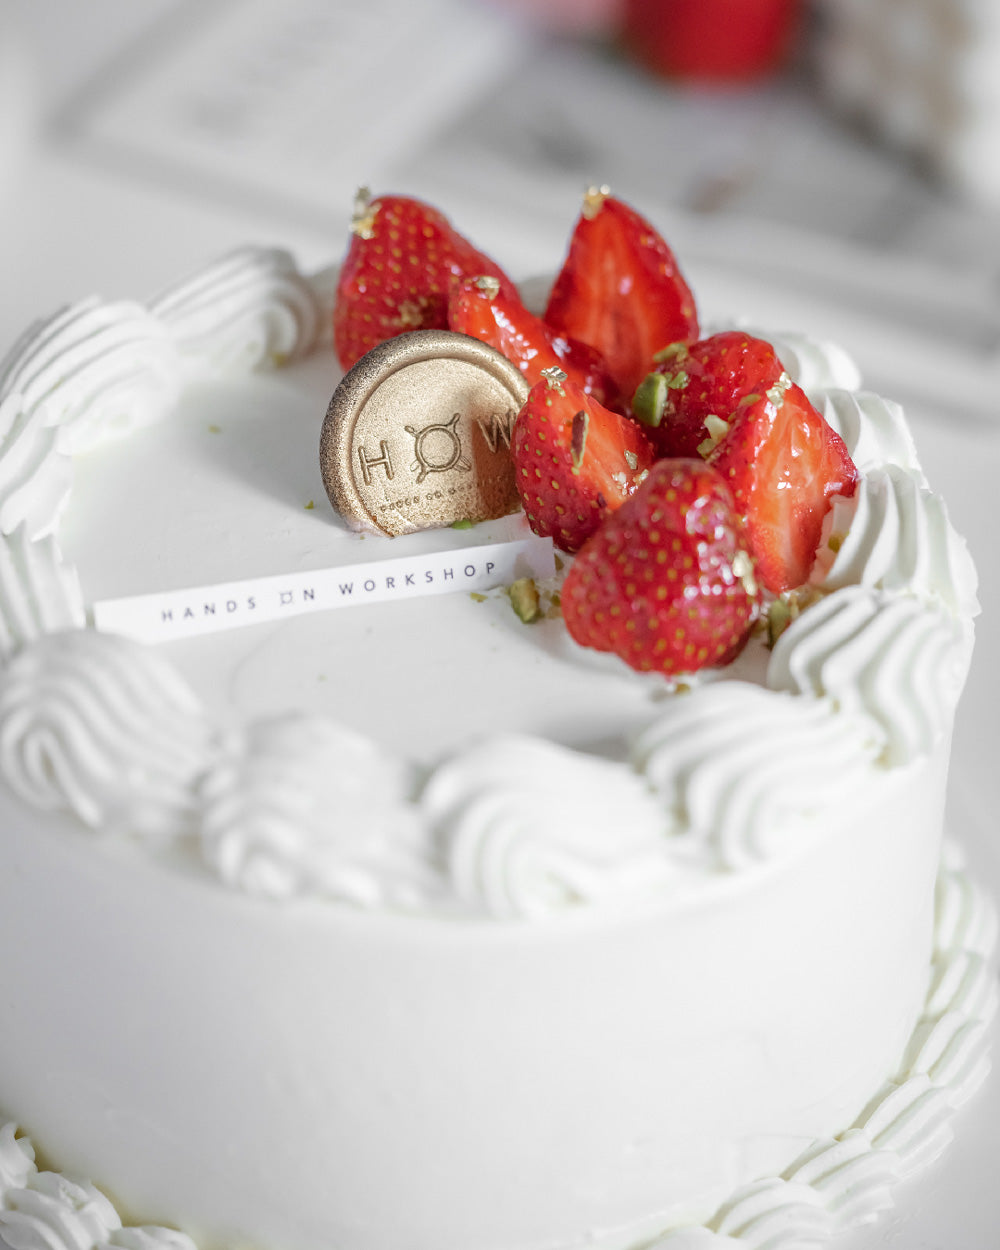 Strawberry Cake decorated with Fresh Strawberries & Chantilly Cream